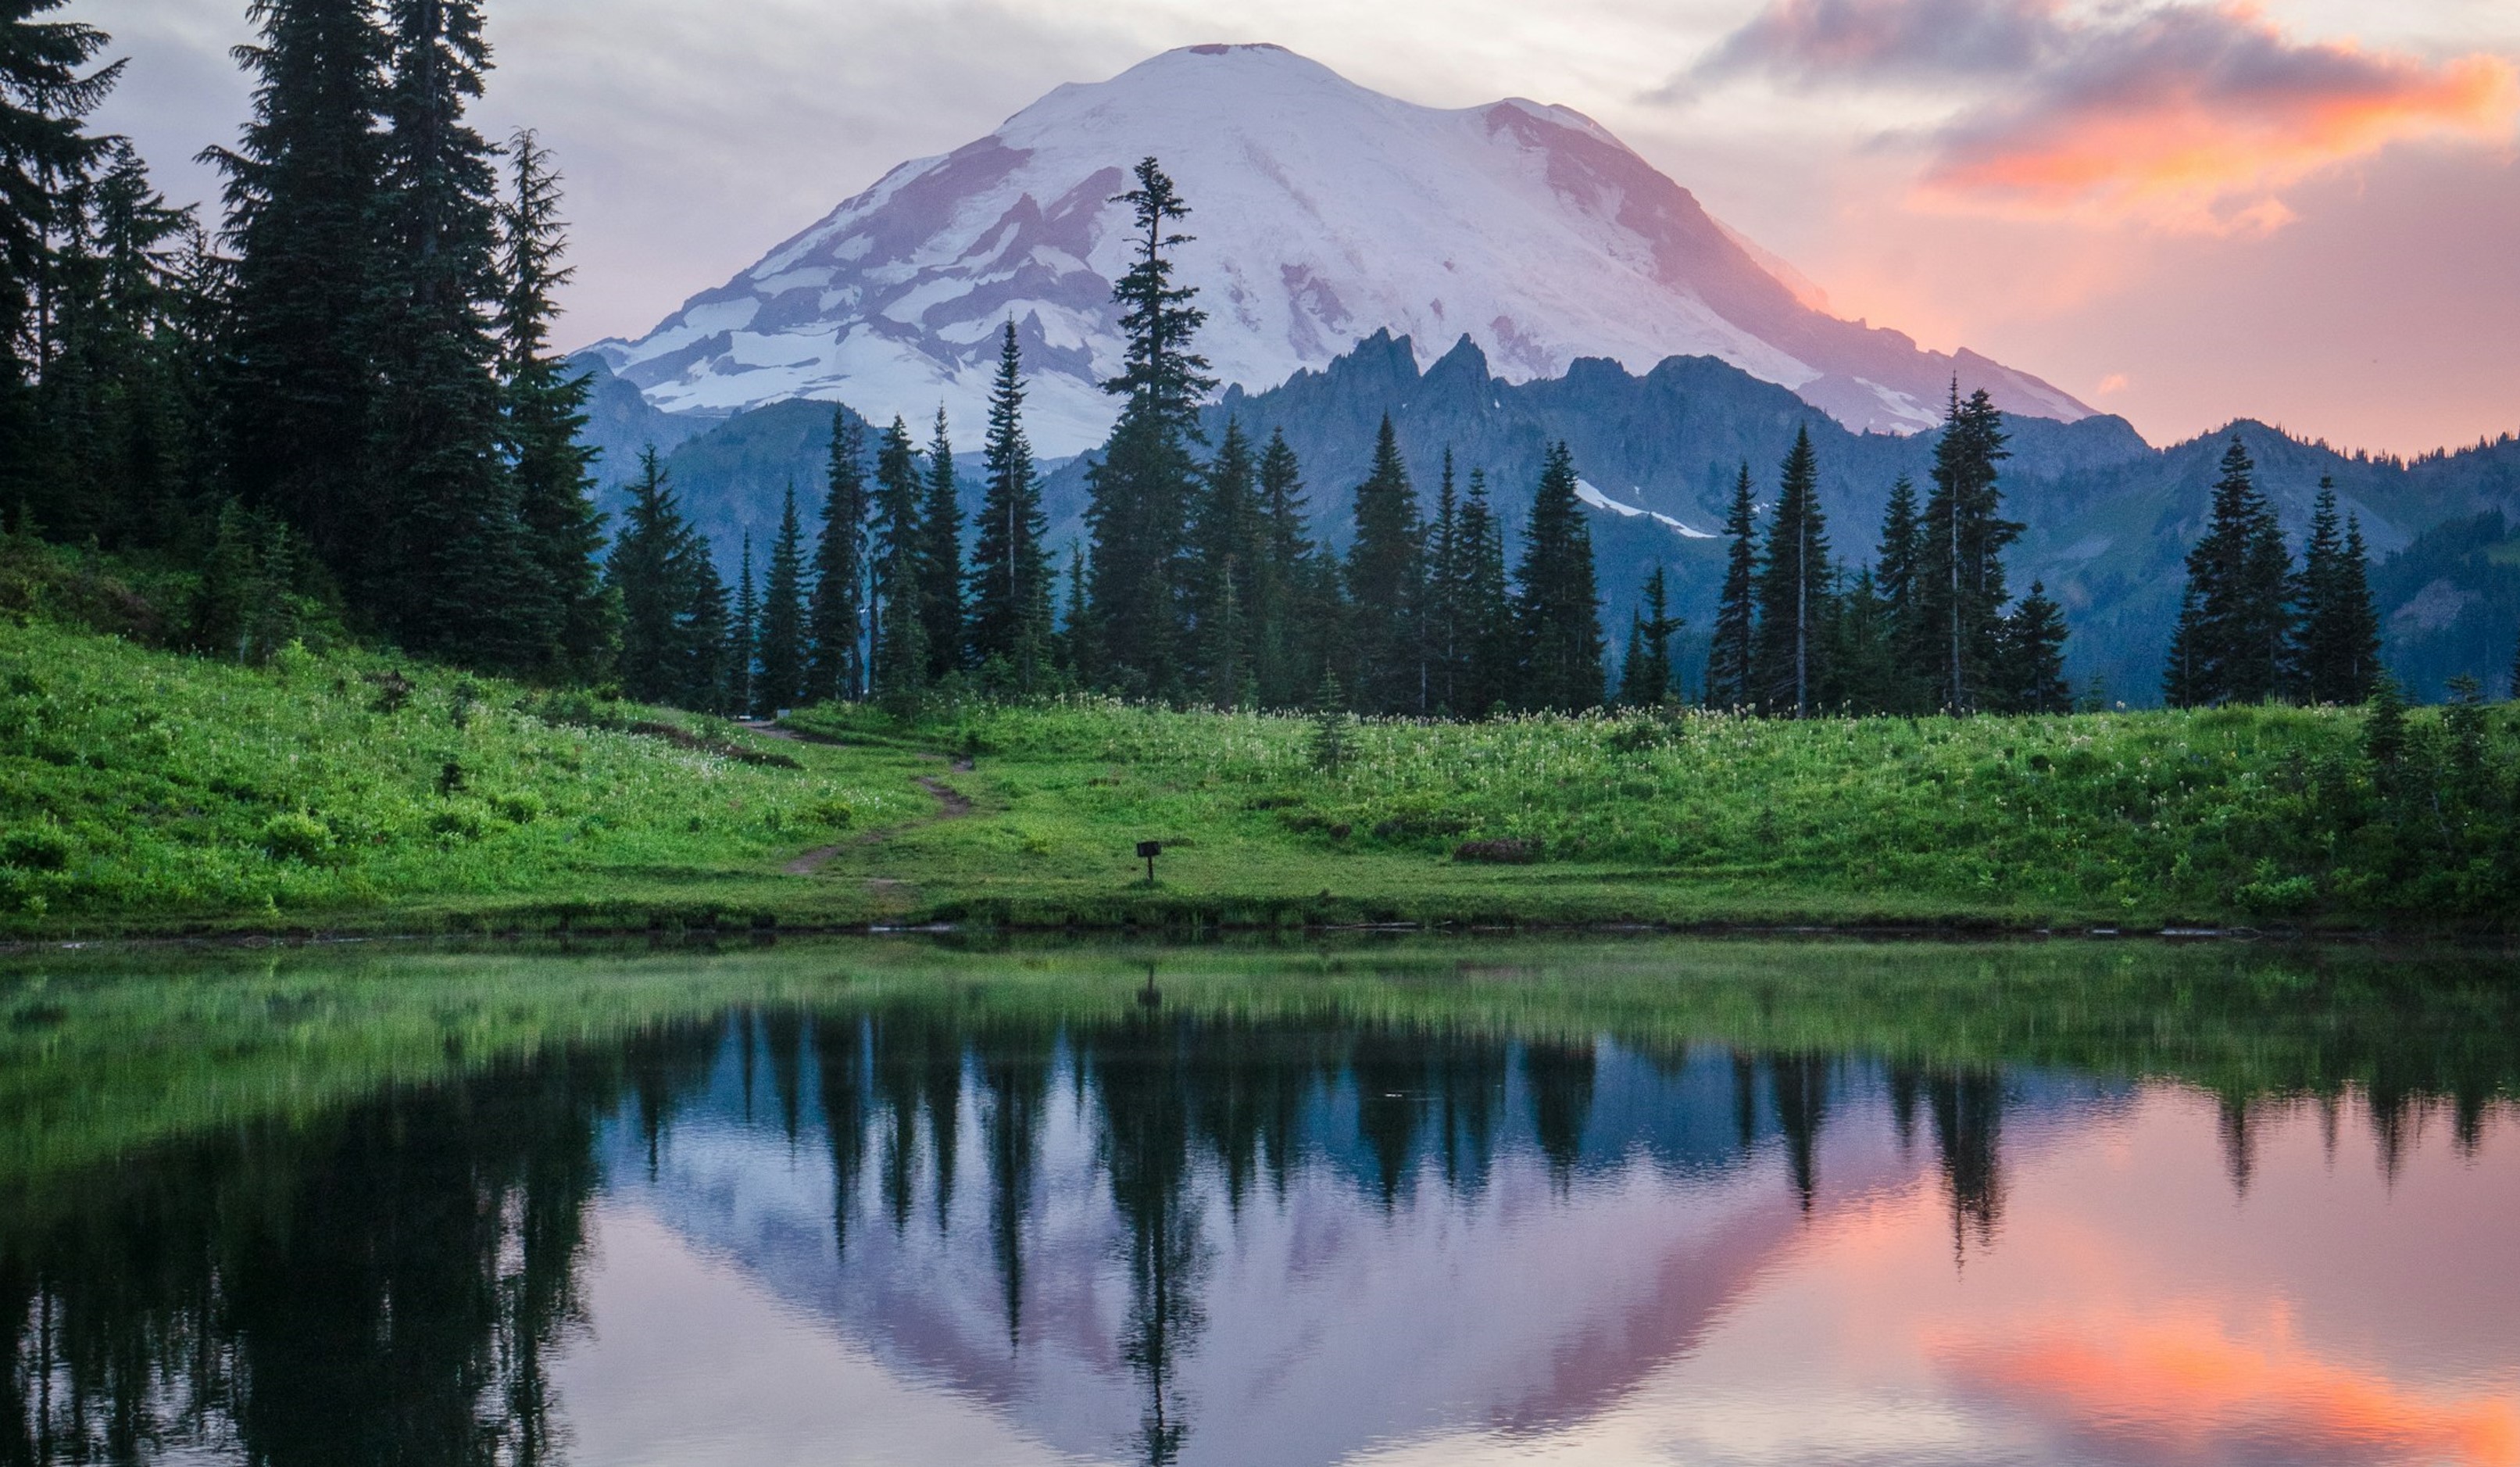 Mount Rainier, a water view, and a pink warm sky view.